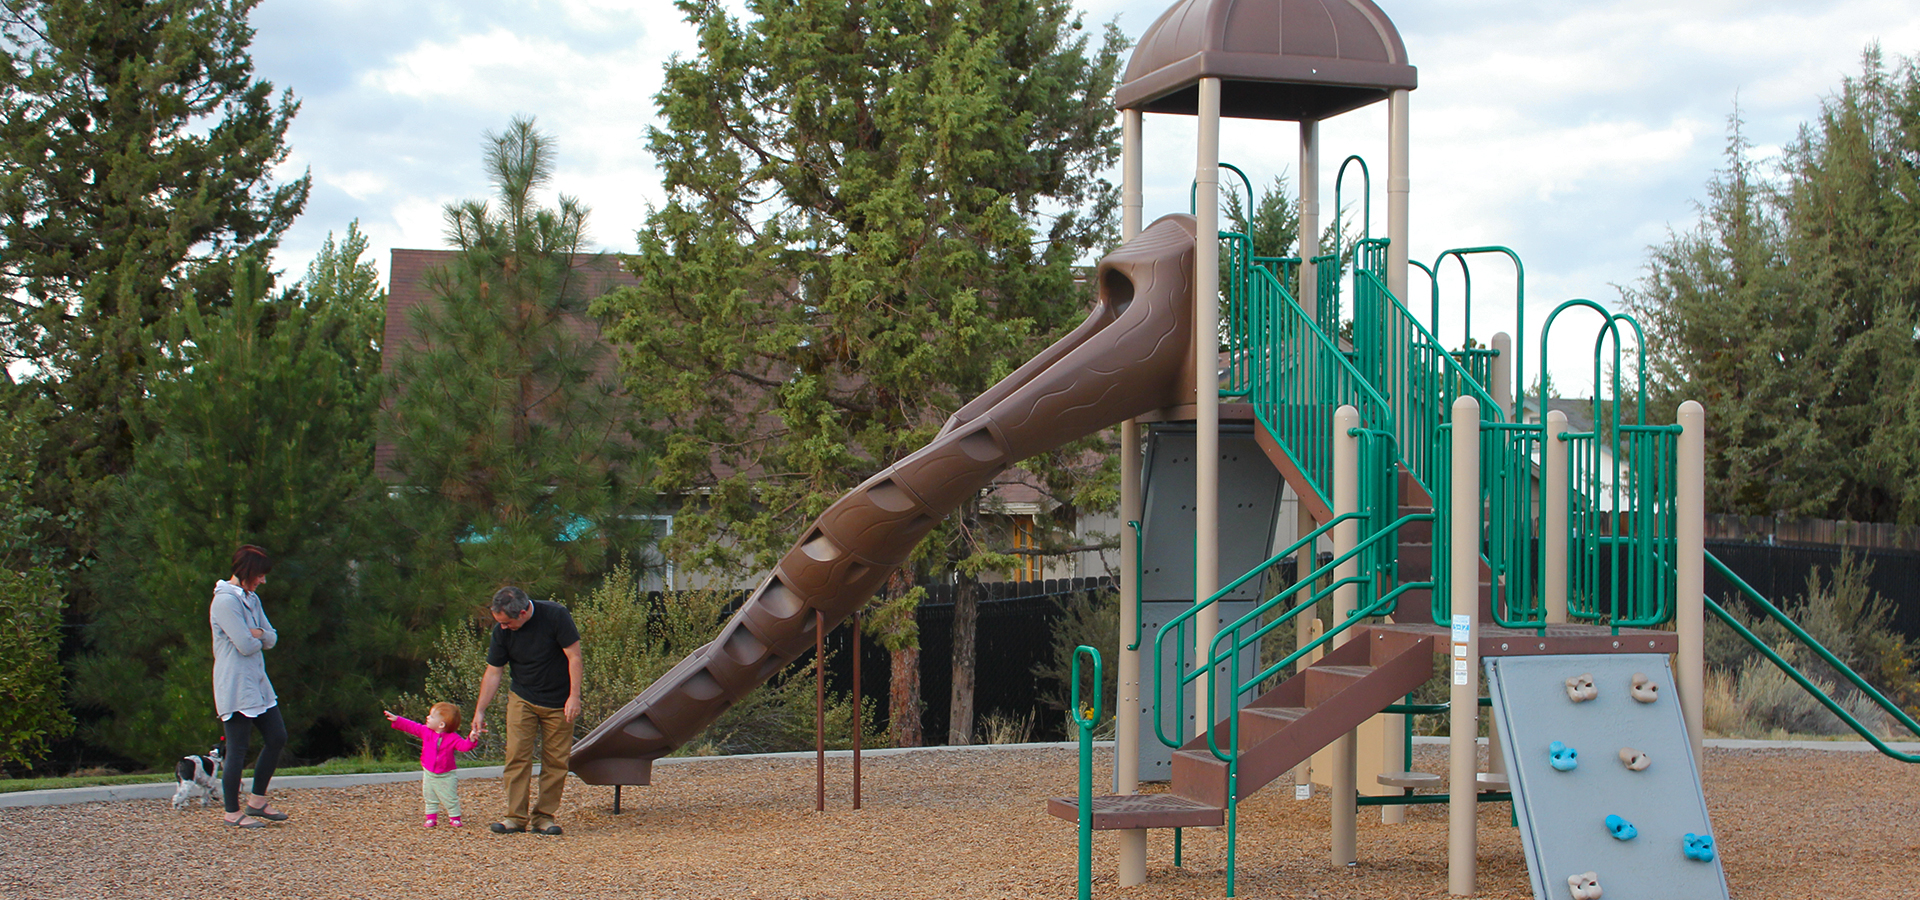 The playground at Boyd Acres park.